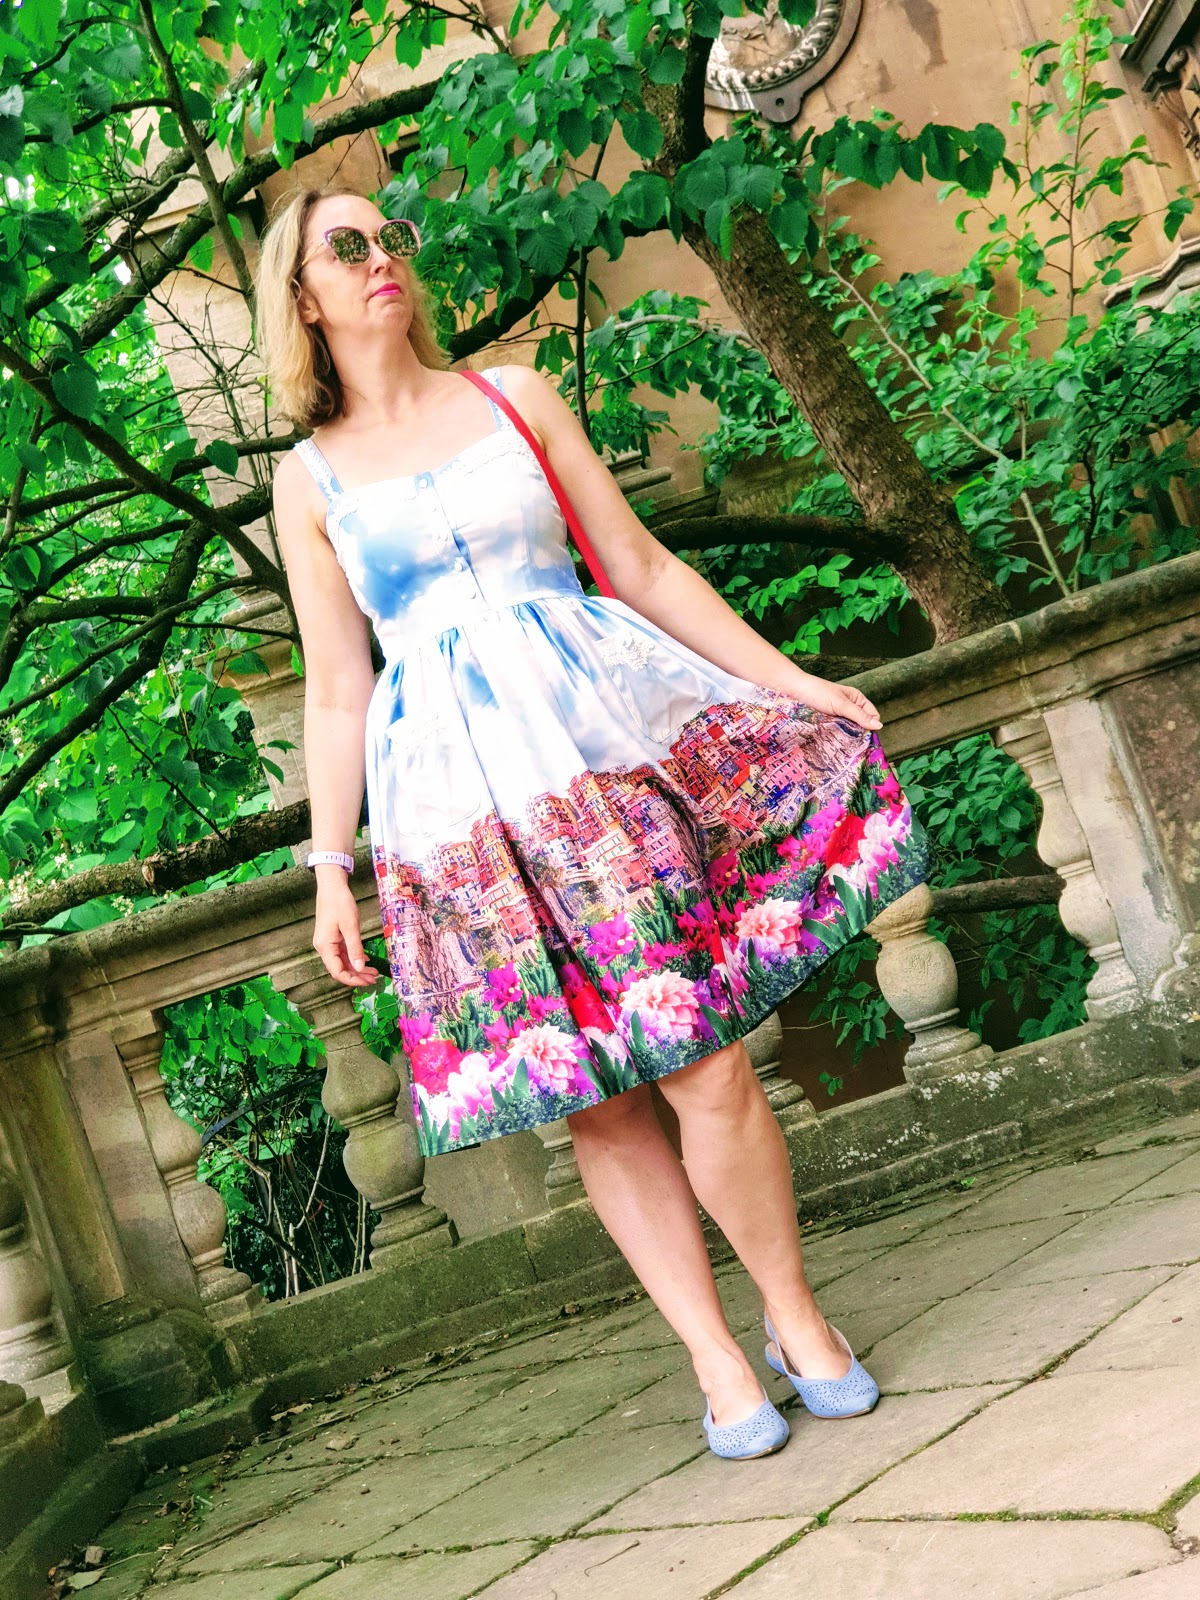 Vintage Afternoon Tea Dress: Over 40 Style | Claire's World